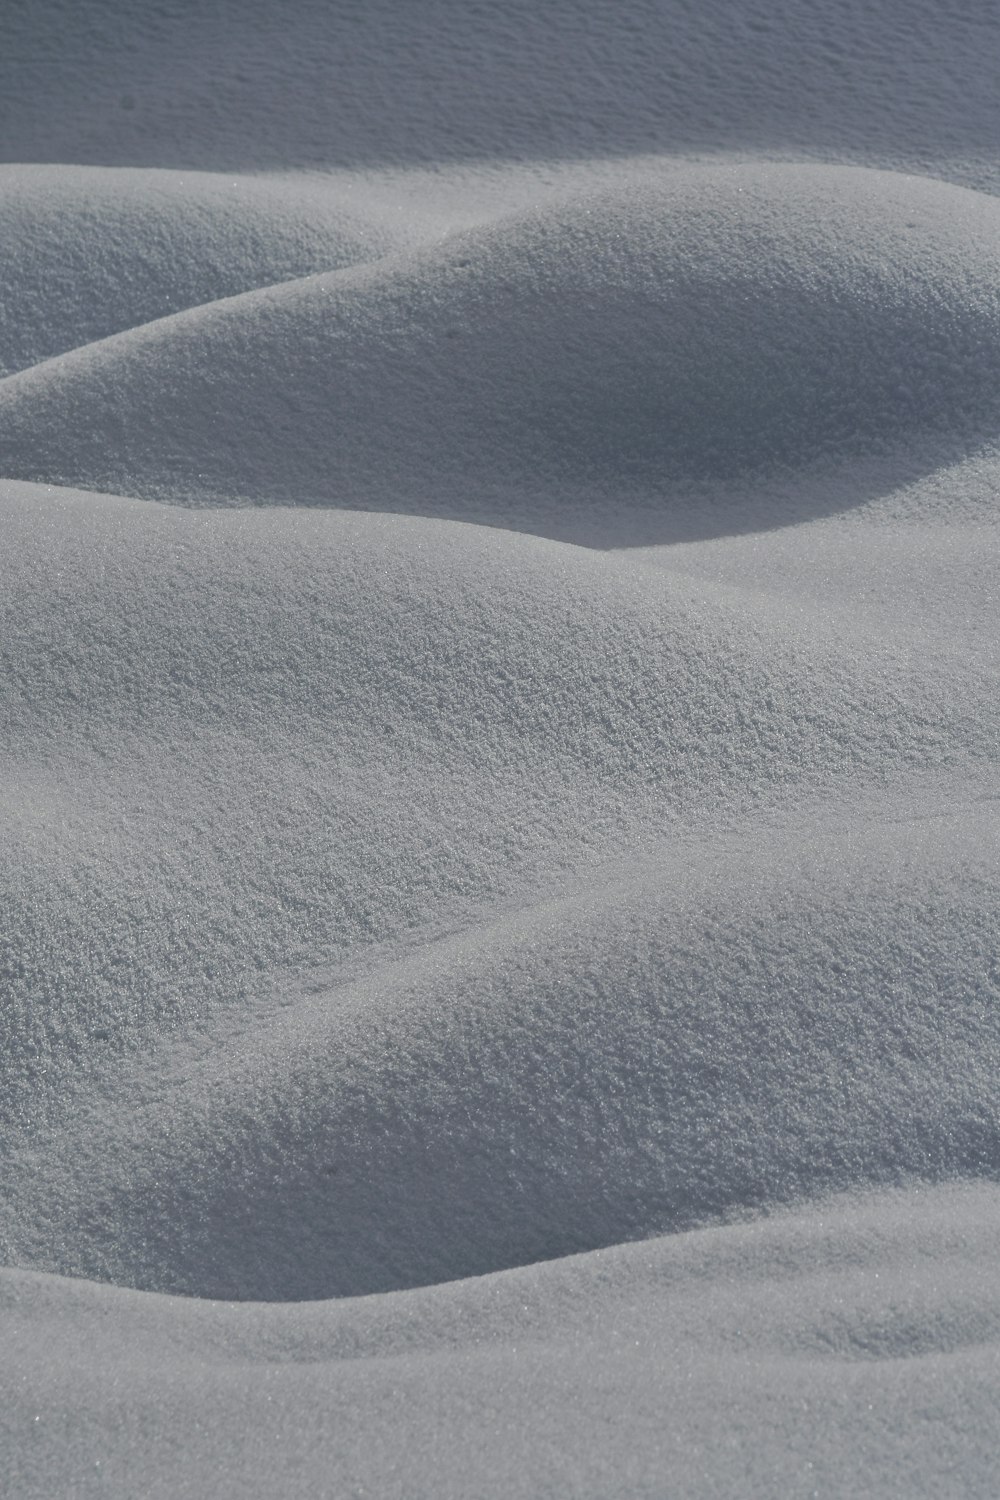 a close up of a snow covered ground